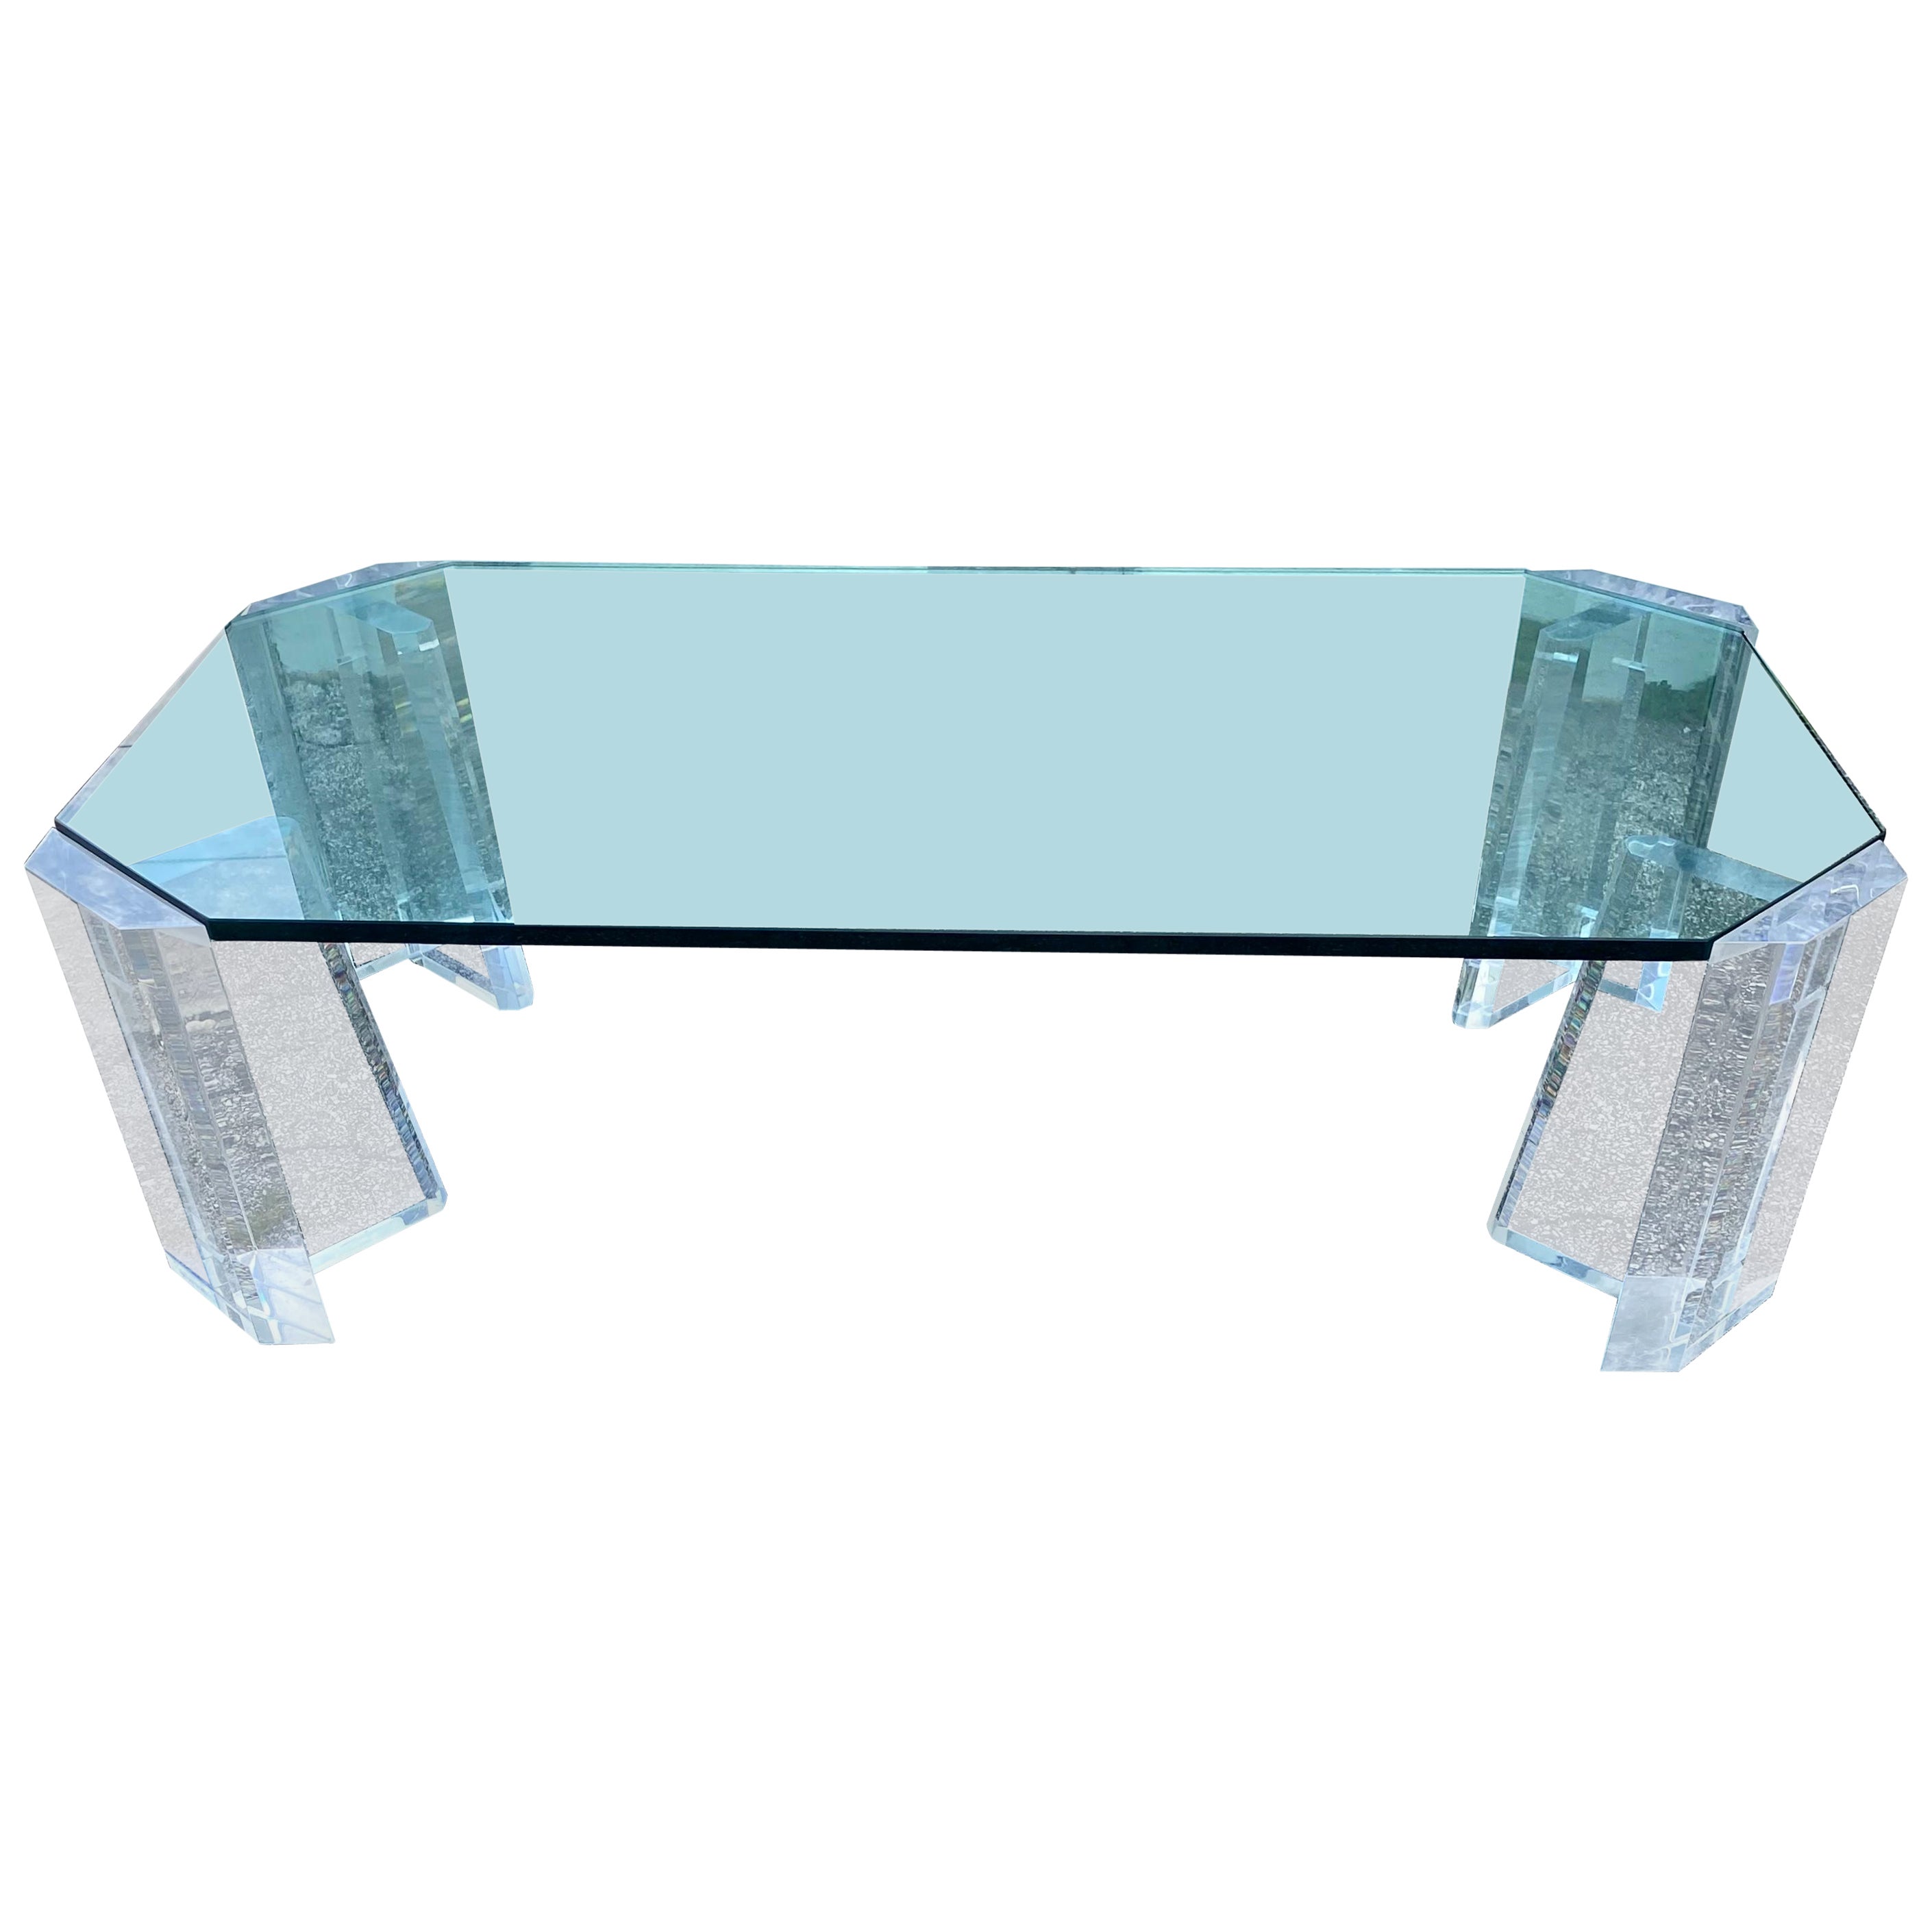 1970s Charles Hollis Lucite Glass Coffee Table